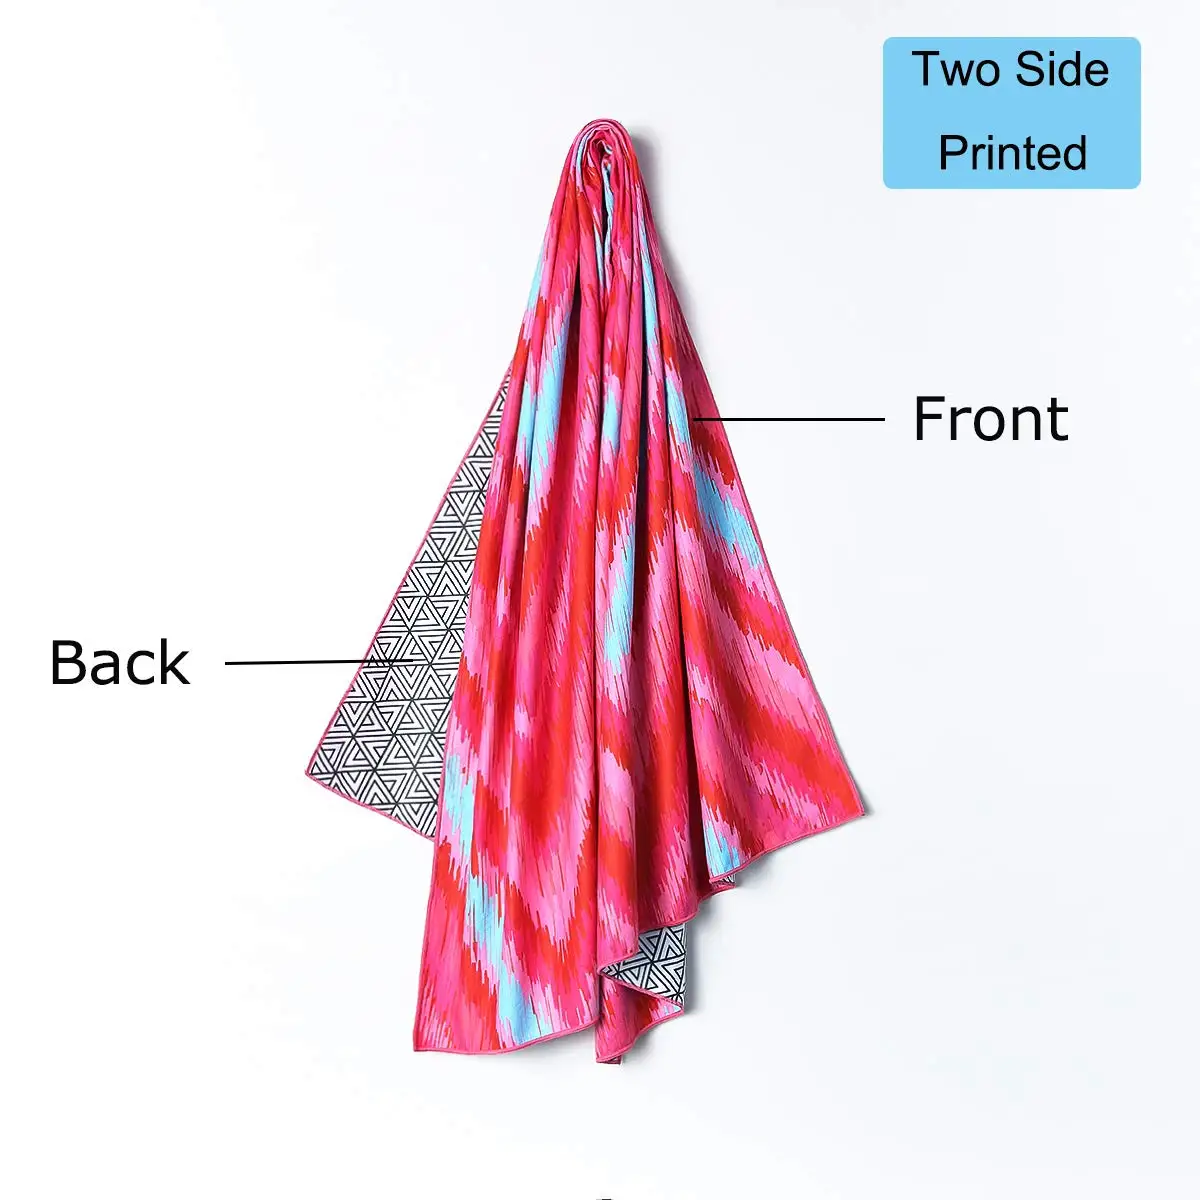 Microfiber recycled polyester Oversized Extra Large Sand Free Quick Dry Lightweight beach towel